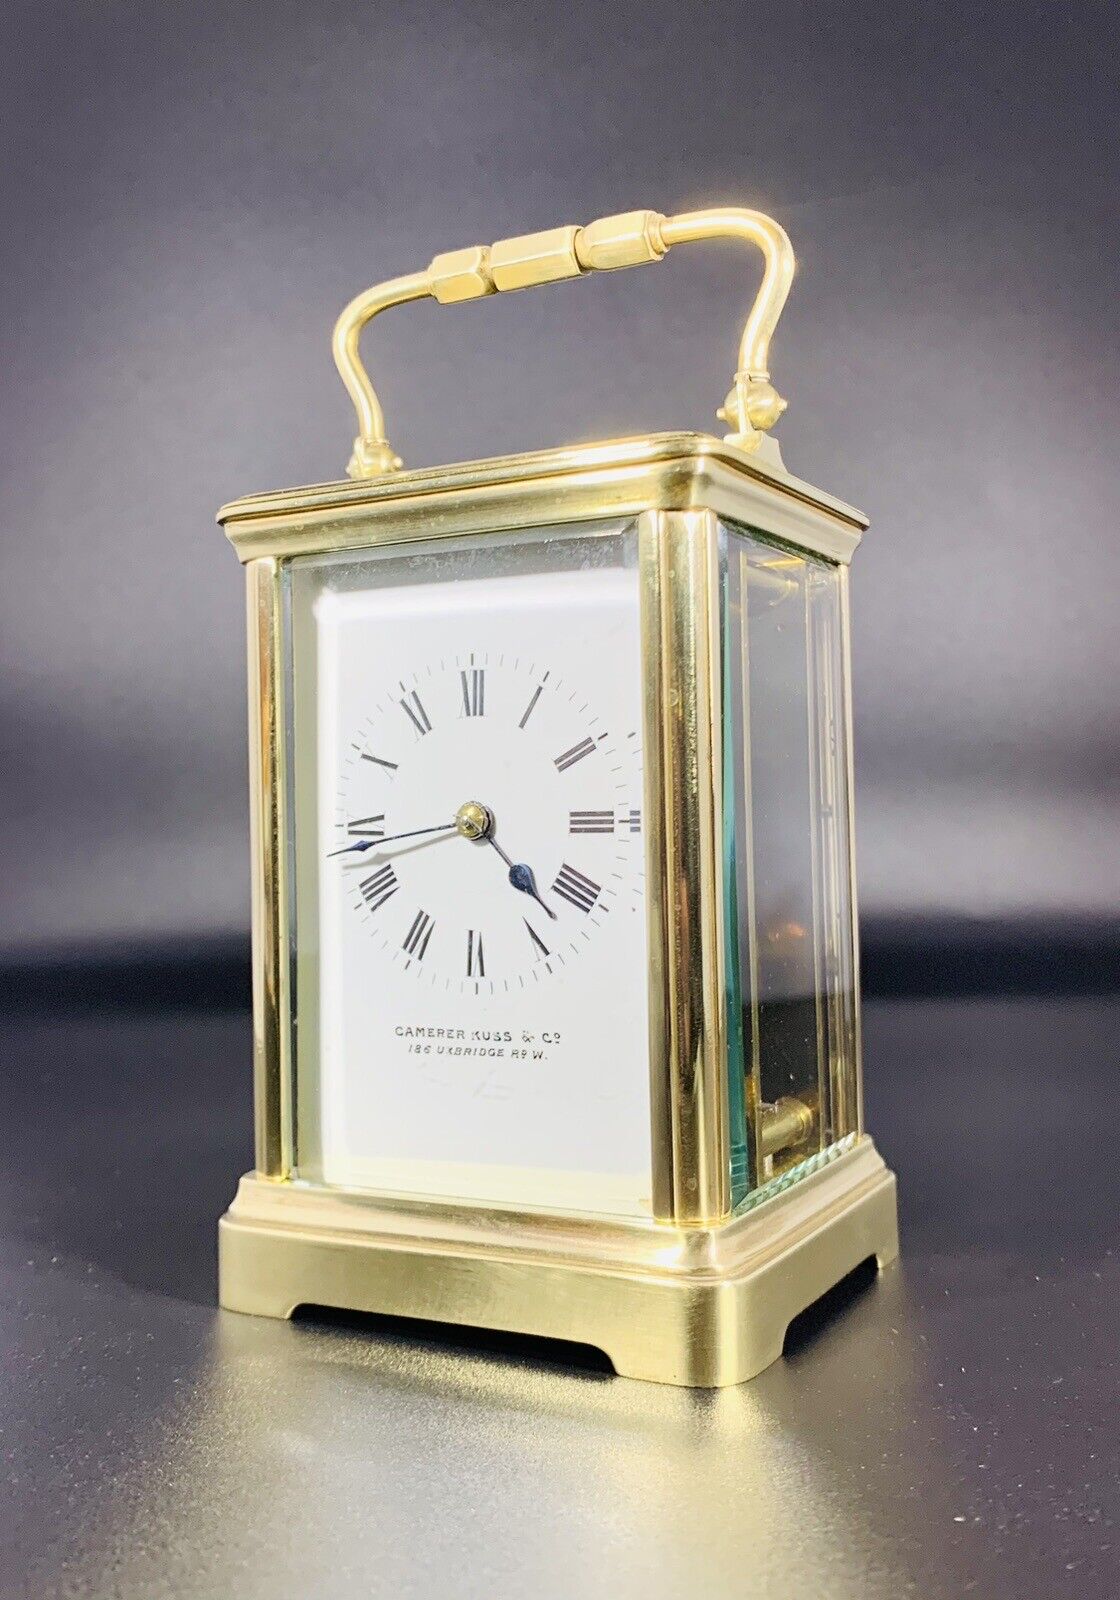 Fabulous Solid Brass Carriage Clock by Camerer Kuss & Co of London (c.1880)